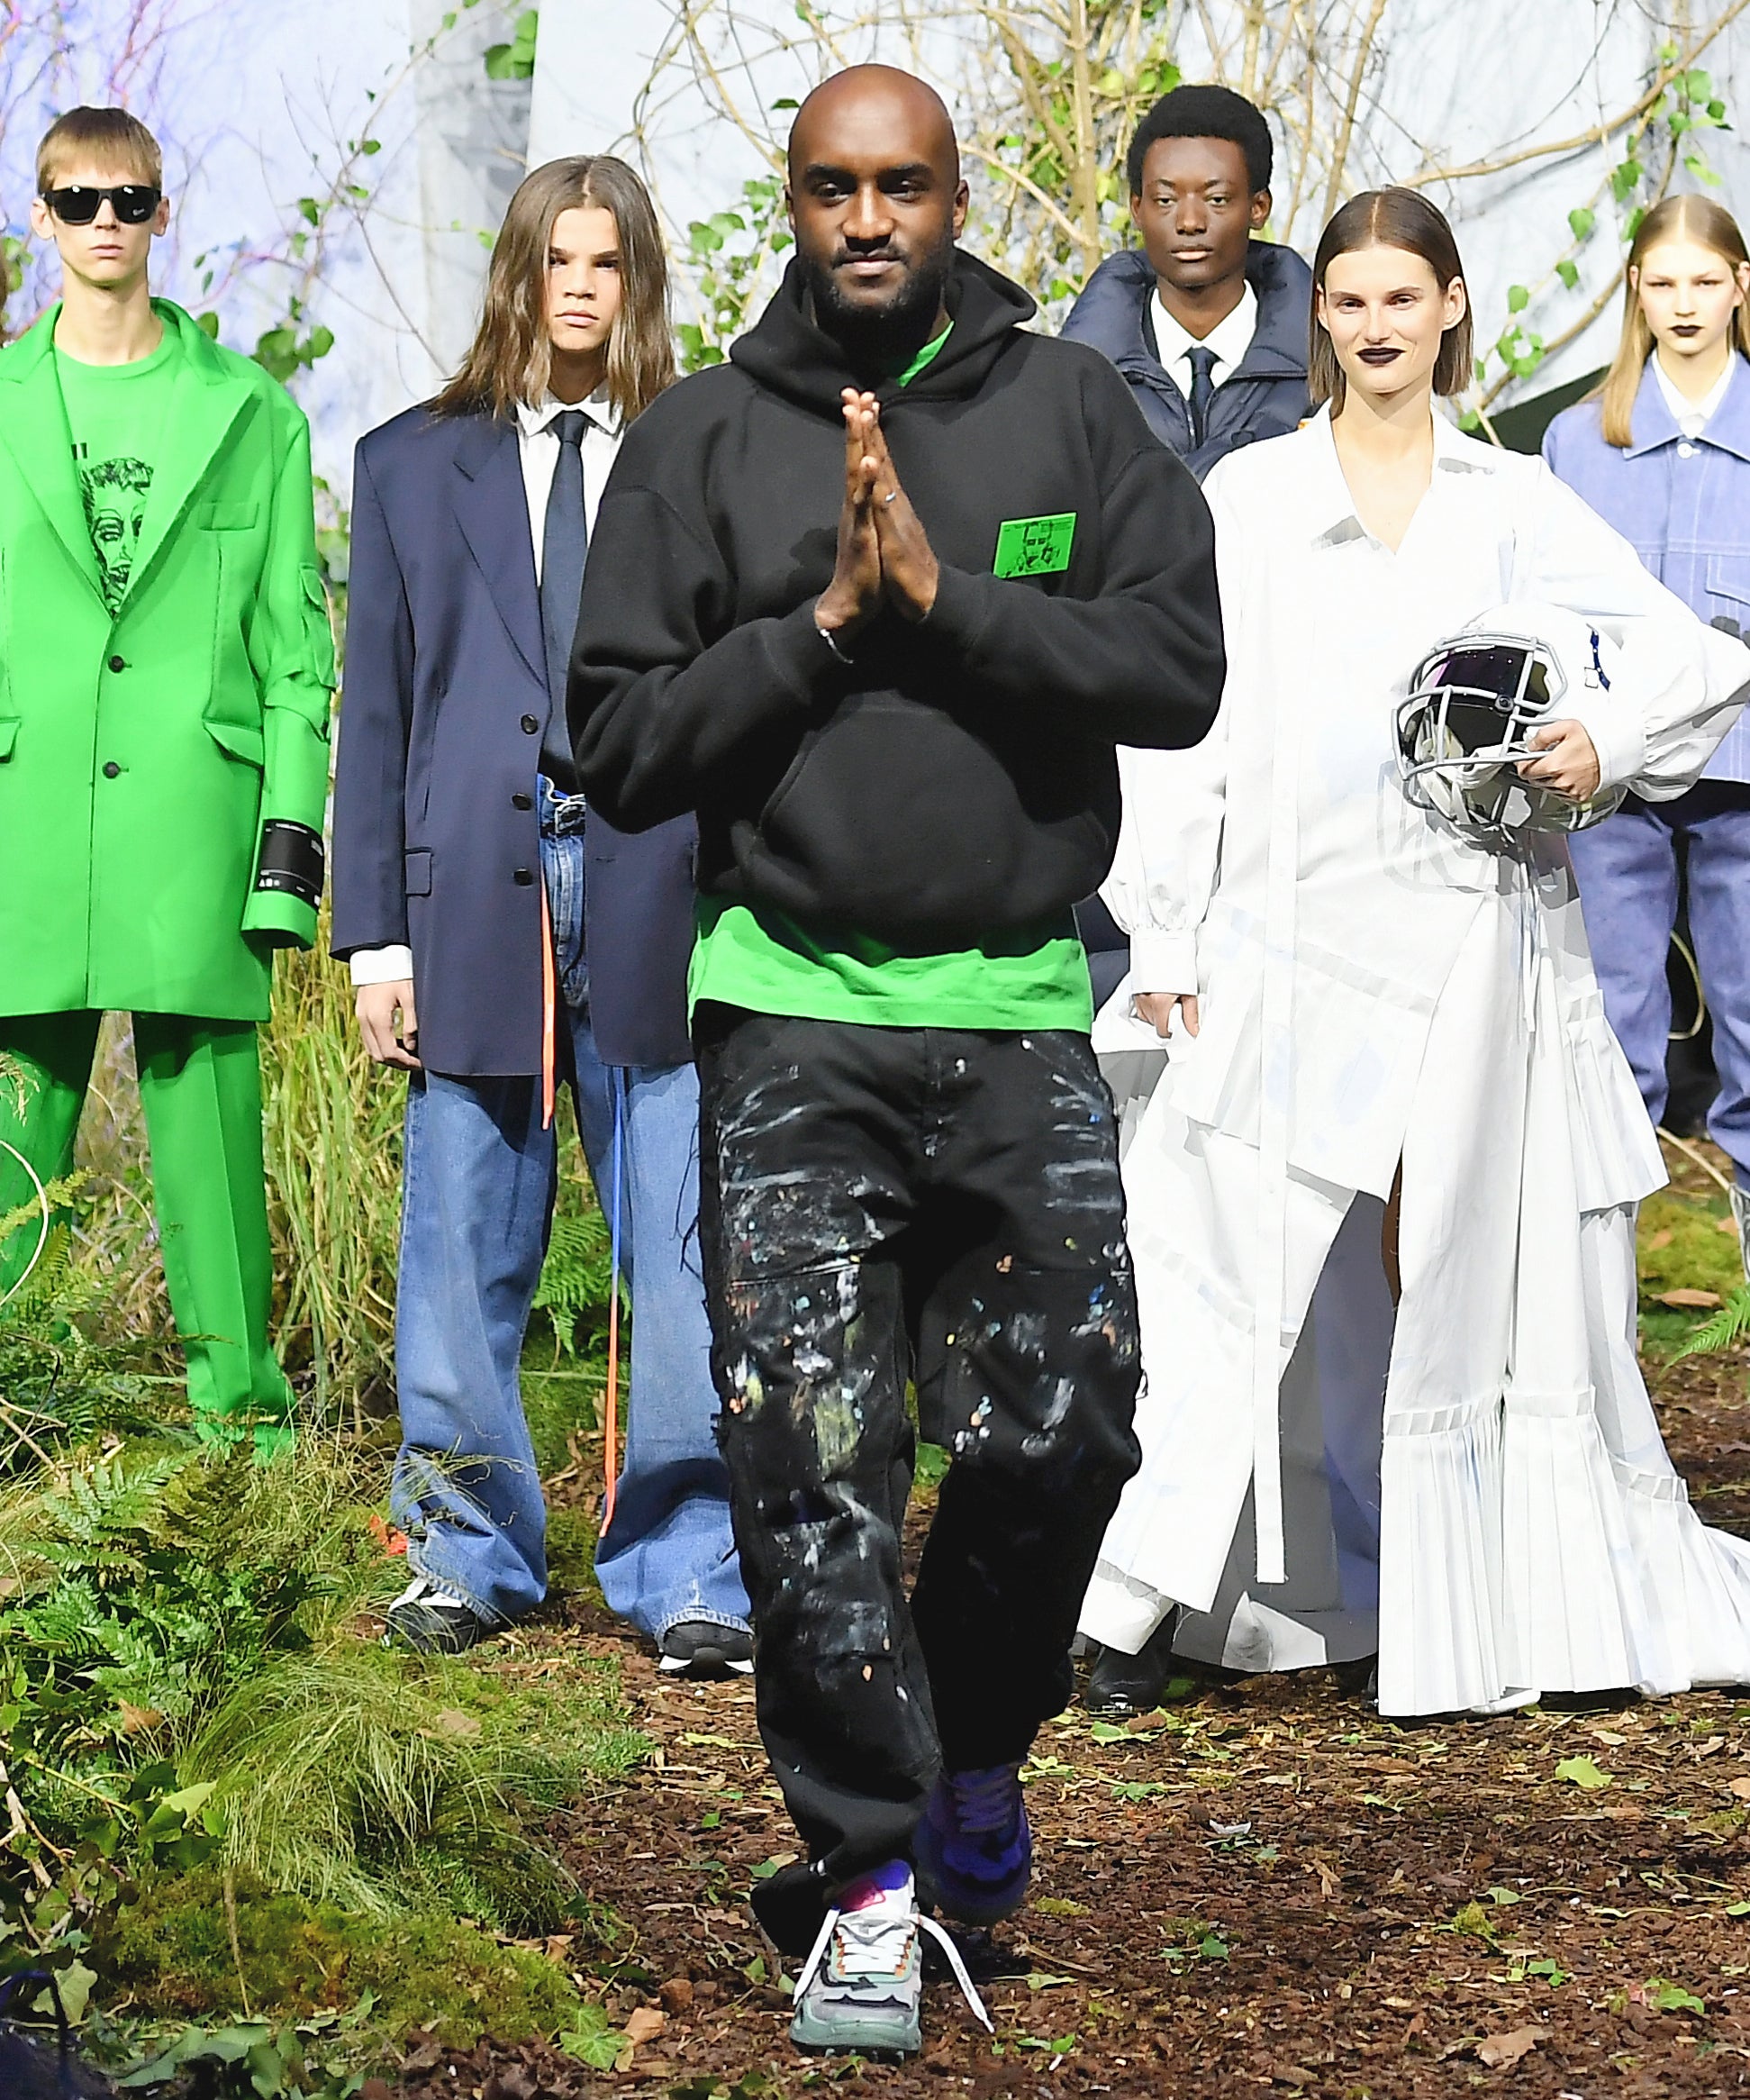 Virgil Abloh's Greatest Hits, From Off-White x Nike to Louis Vuitton